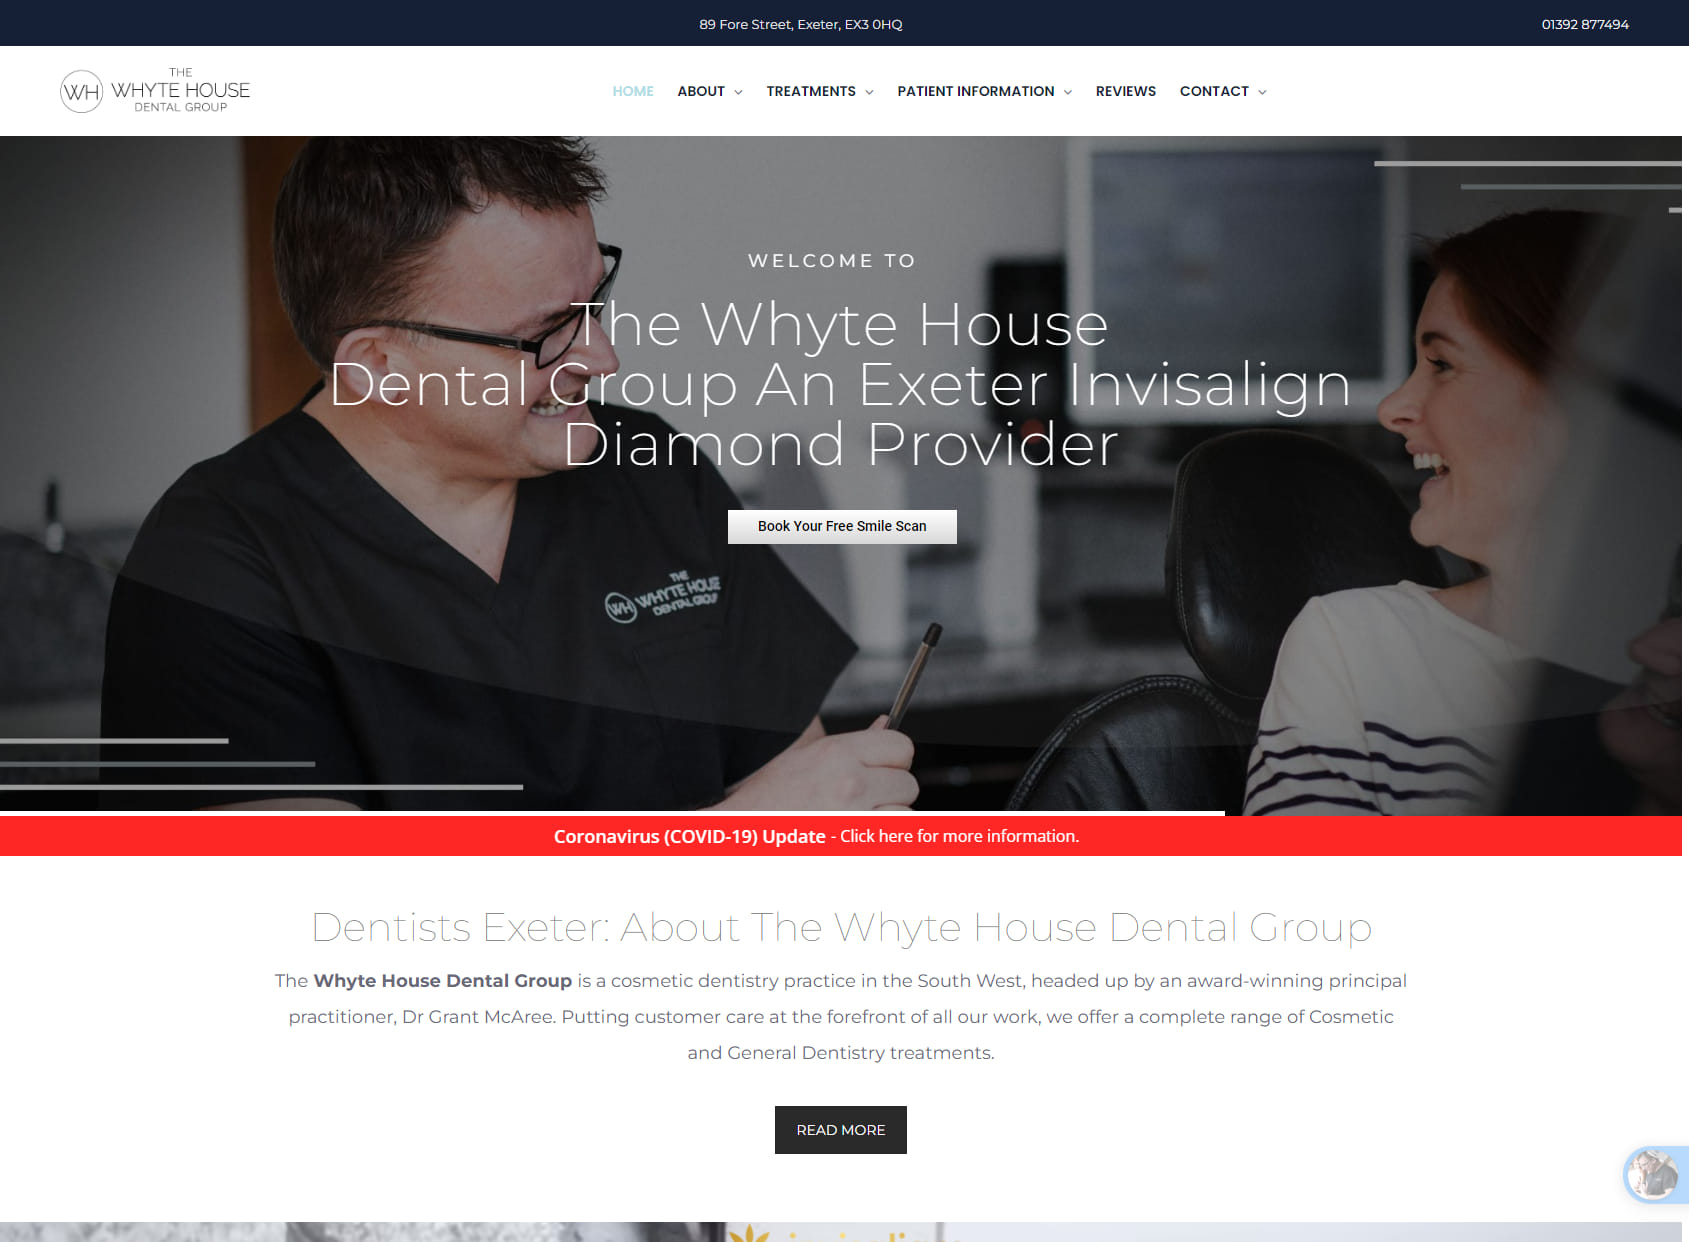 The Whyte House Dental Group